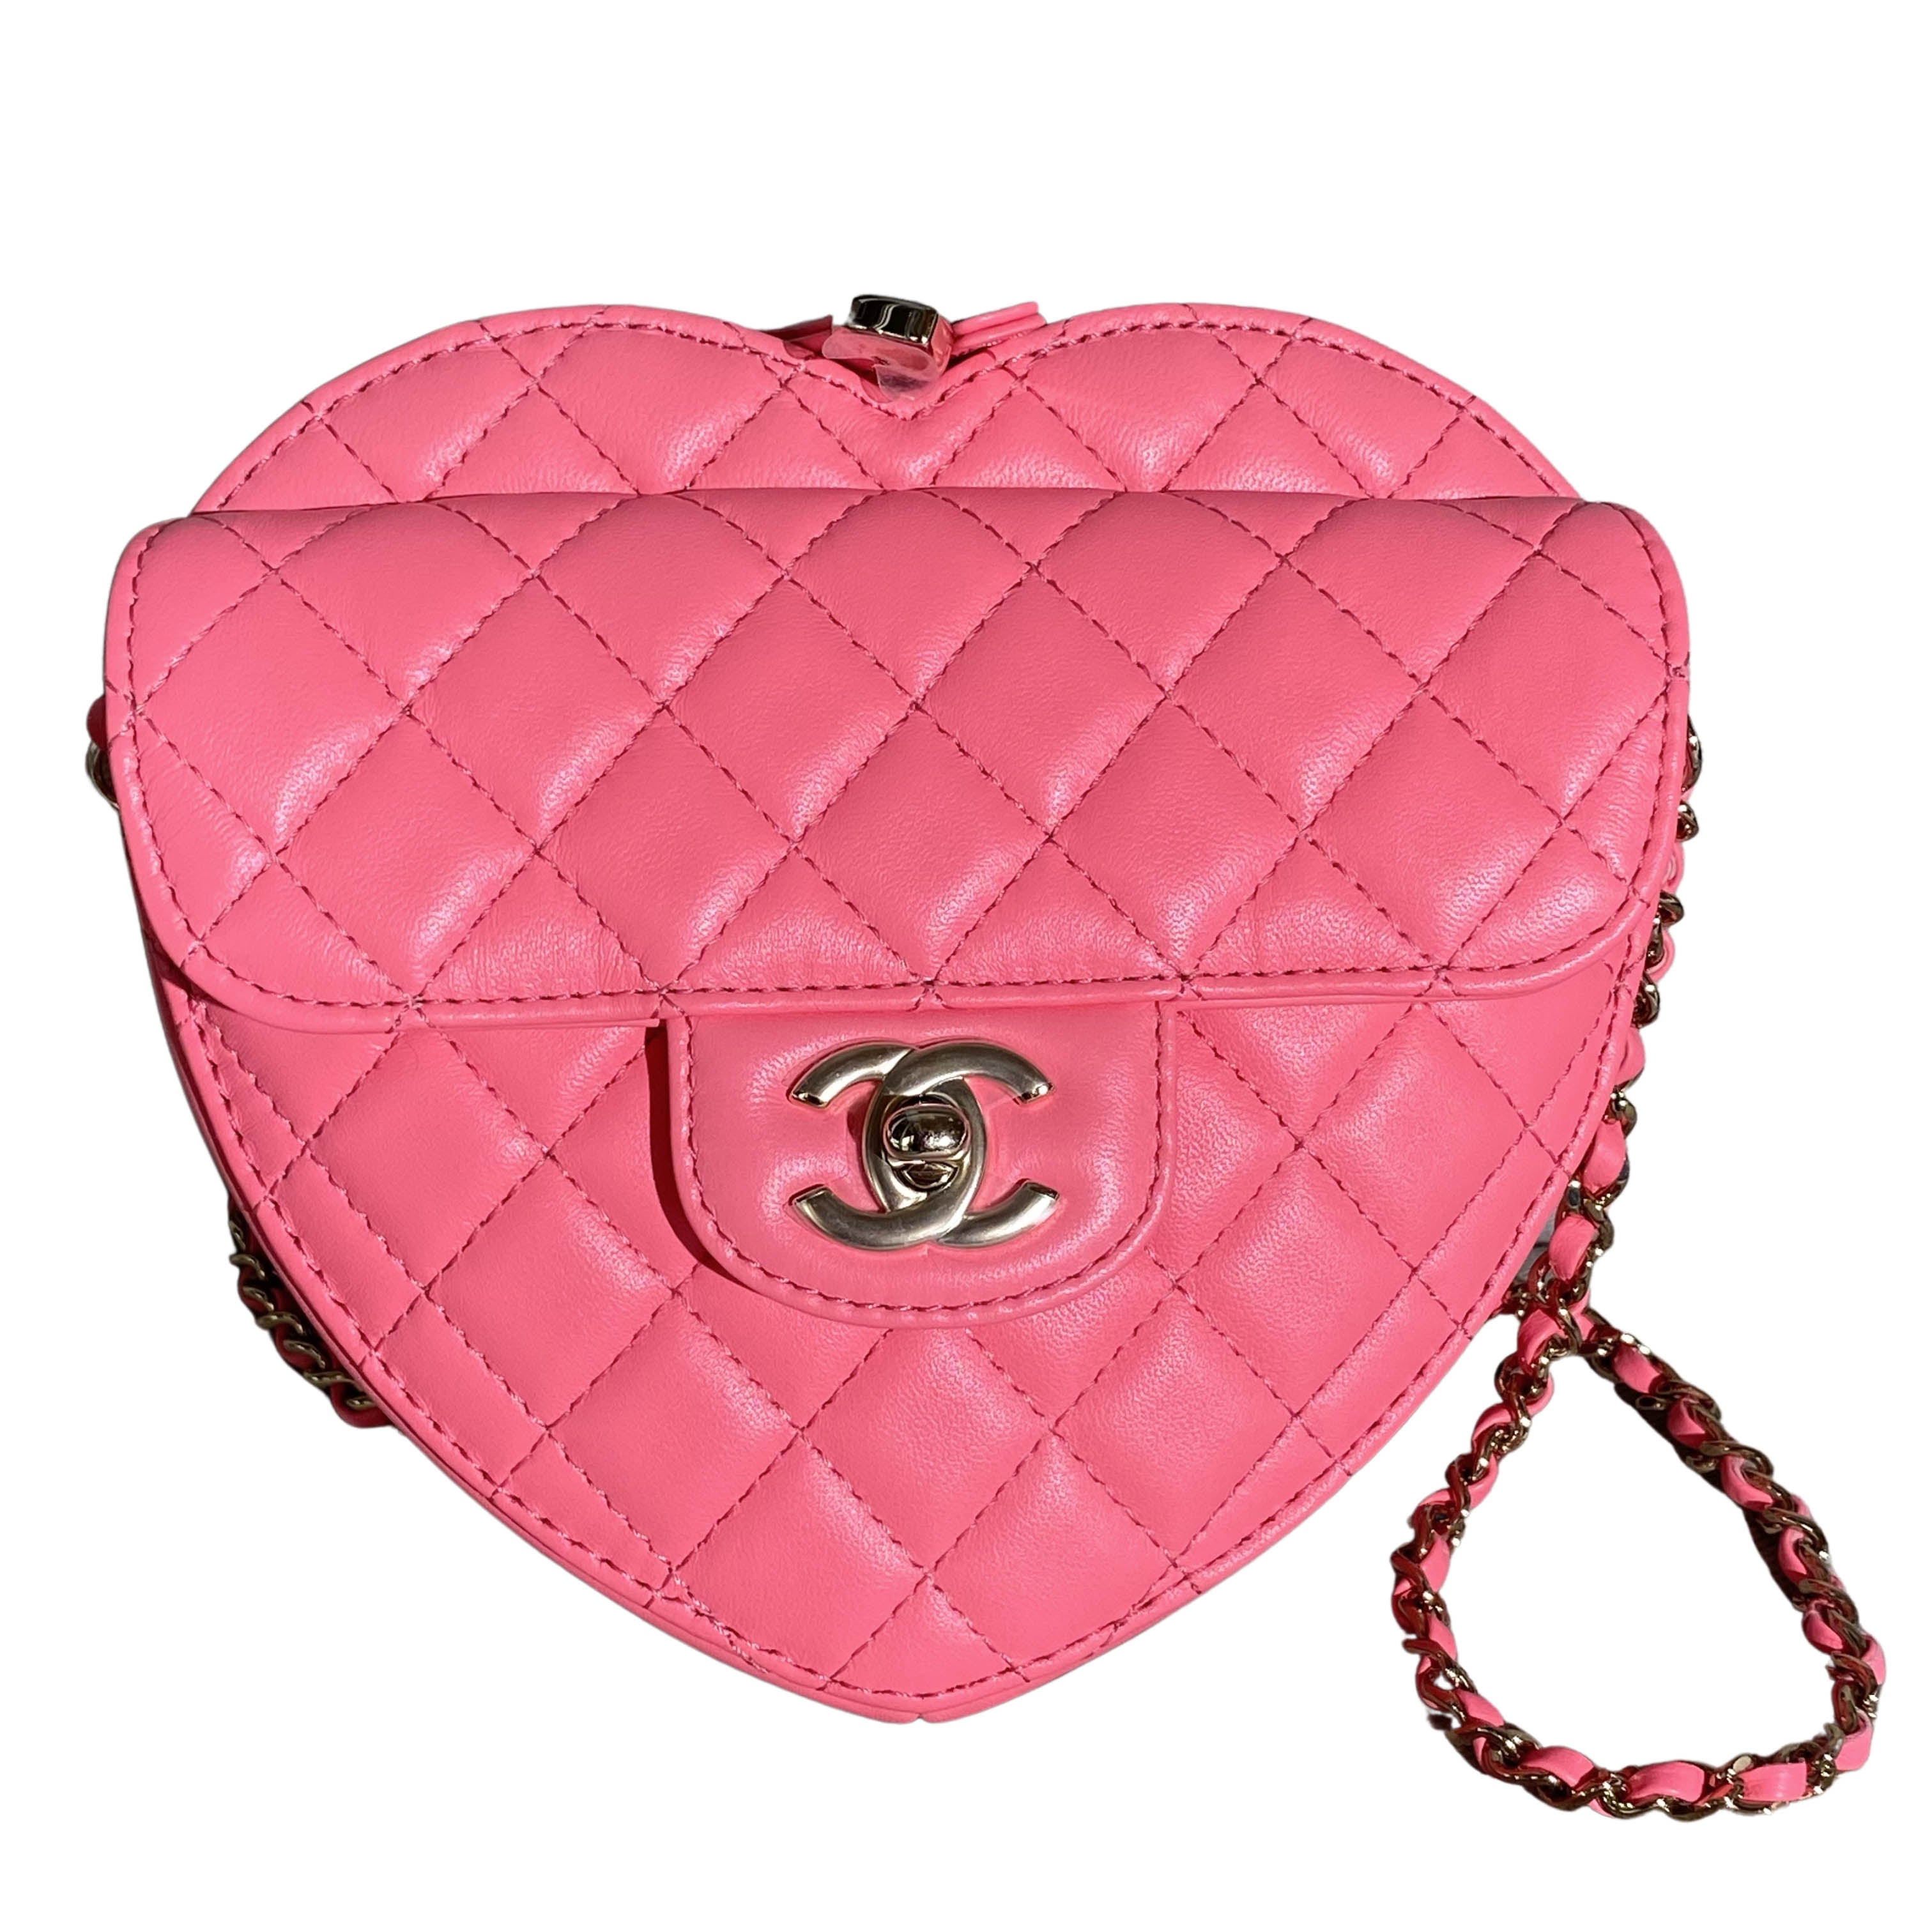 CHANEL 22S Pink Large Heart CC In Love Bag Light Gold Hardware – AYAINLOVE  CURATED LUXURIES